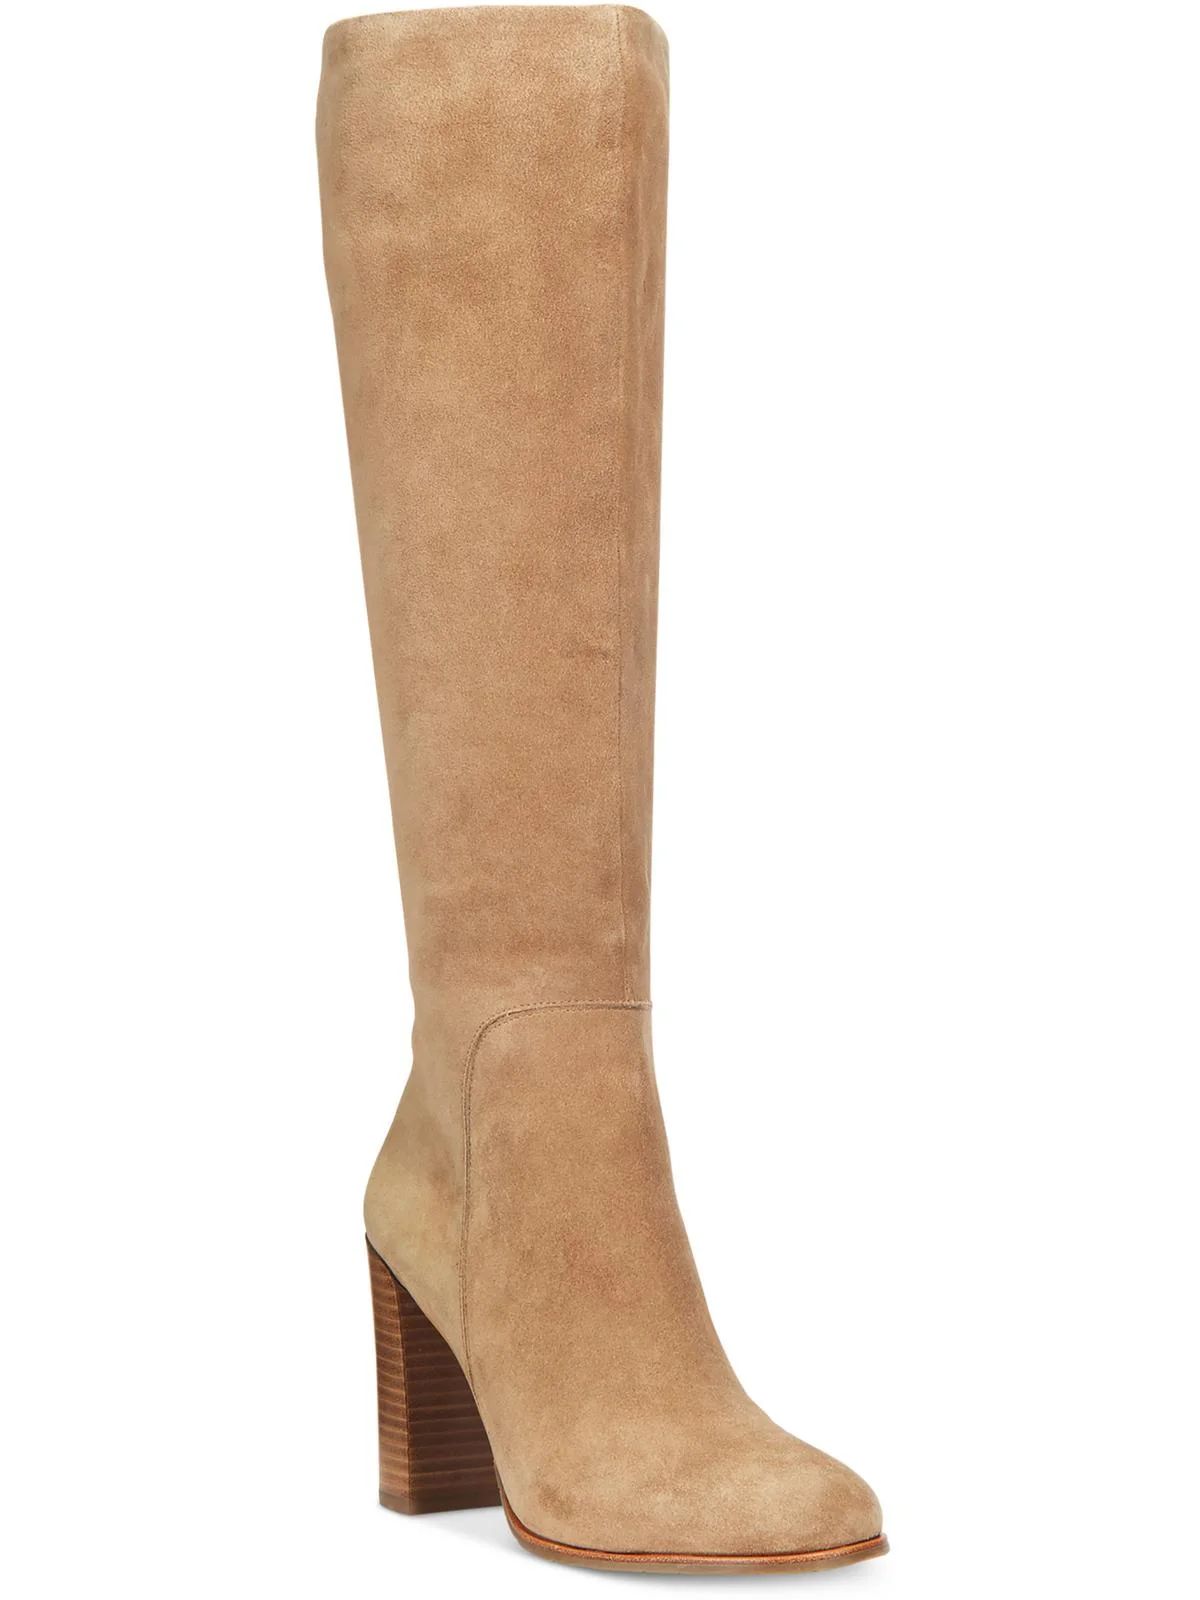 Kenneth Cole New York Womens Justin OTK Faux Suede Tall Over-The-Knee Boots | Walmart (US)